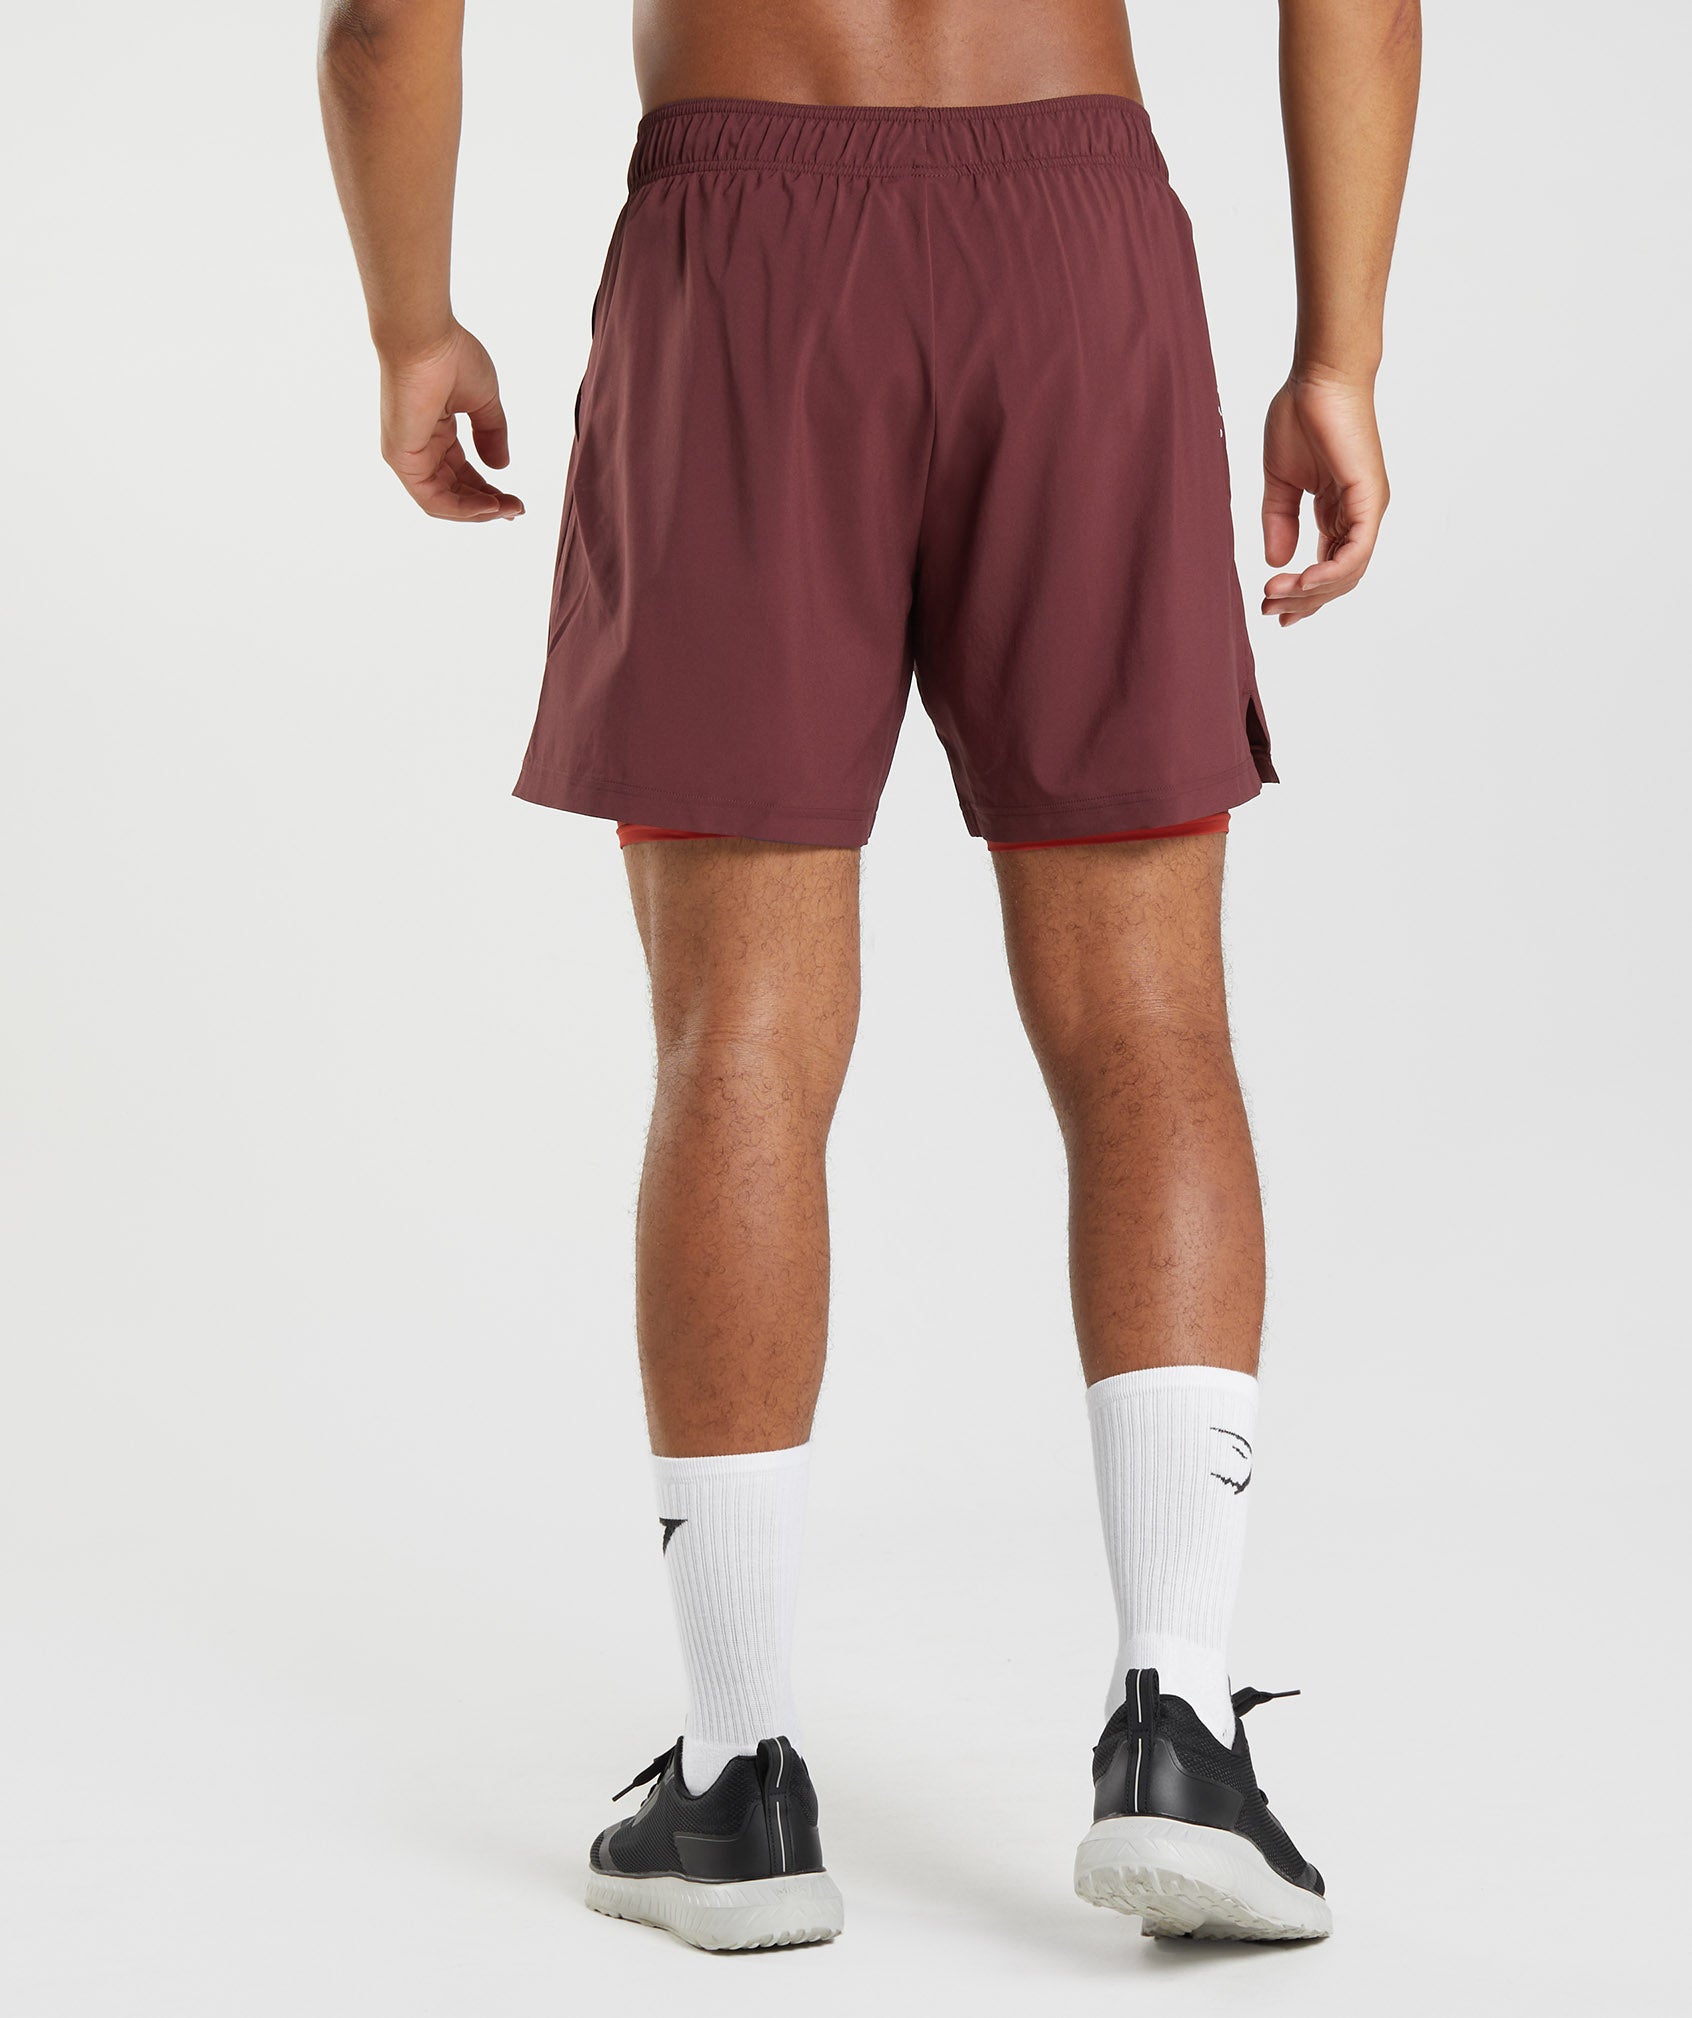 Sport 7" 2 In 1 Shorts in Baked Maroon/Salsa Red - view 2